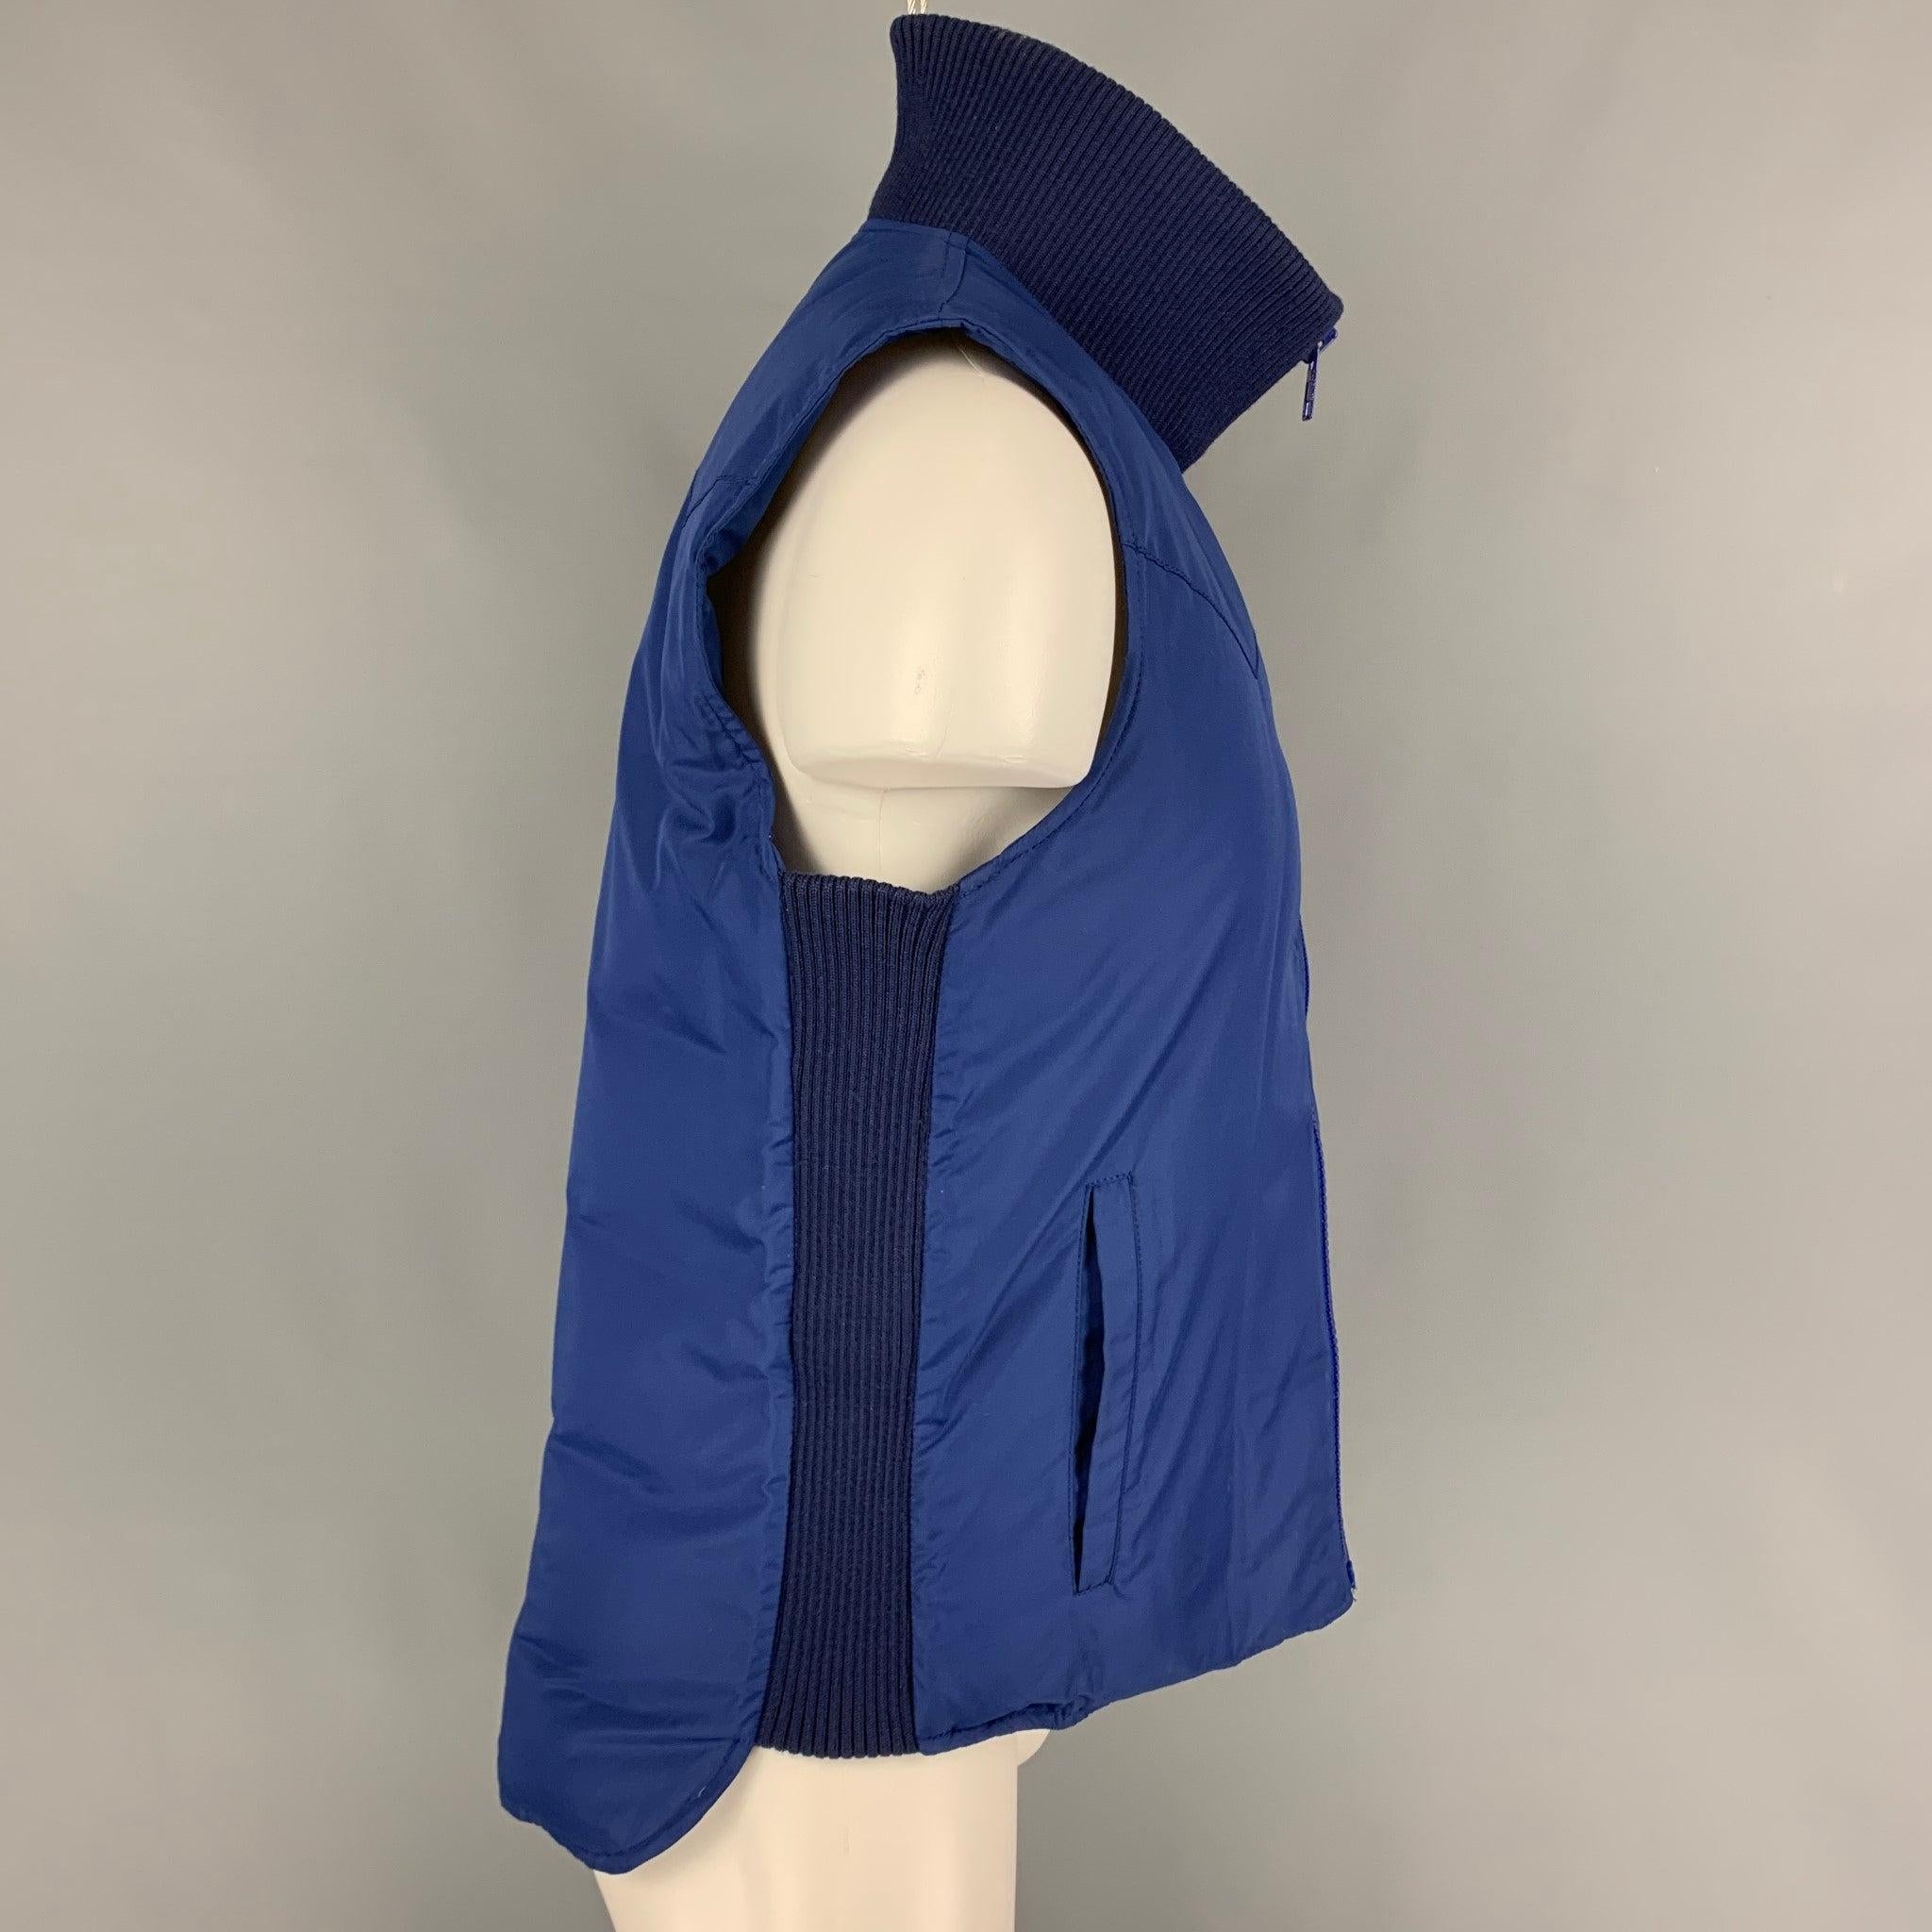 MARC JACOBS vest comes in a blue quilted polyester featuring a high collar, ribbed hem, slit pockets, and a zip up closure.
Very Good
Pre-Owned Condition. 

Marked:   48 

Measurements: 
 
Shoulder:
16 inches  Chest: 42 inches  Length: 27 inches 
 